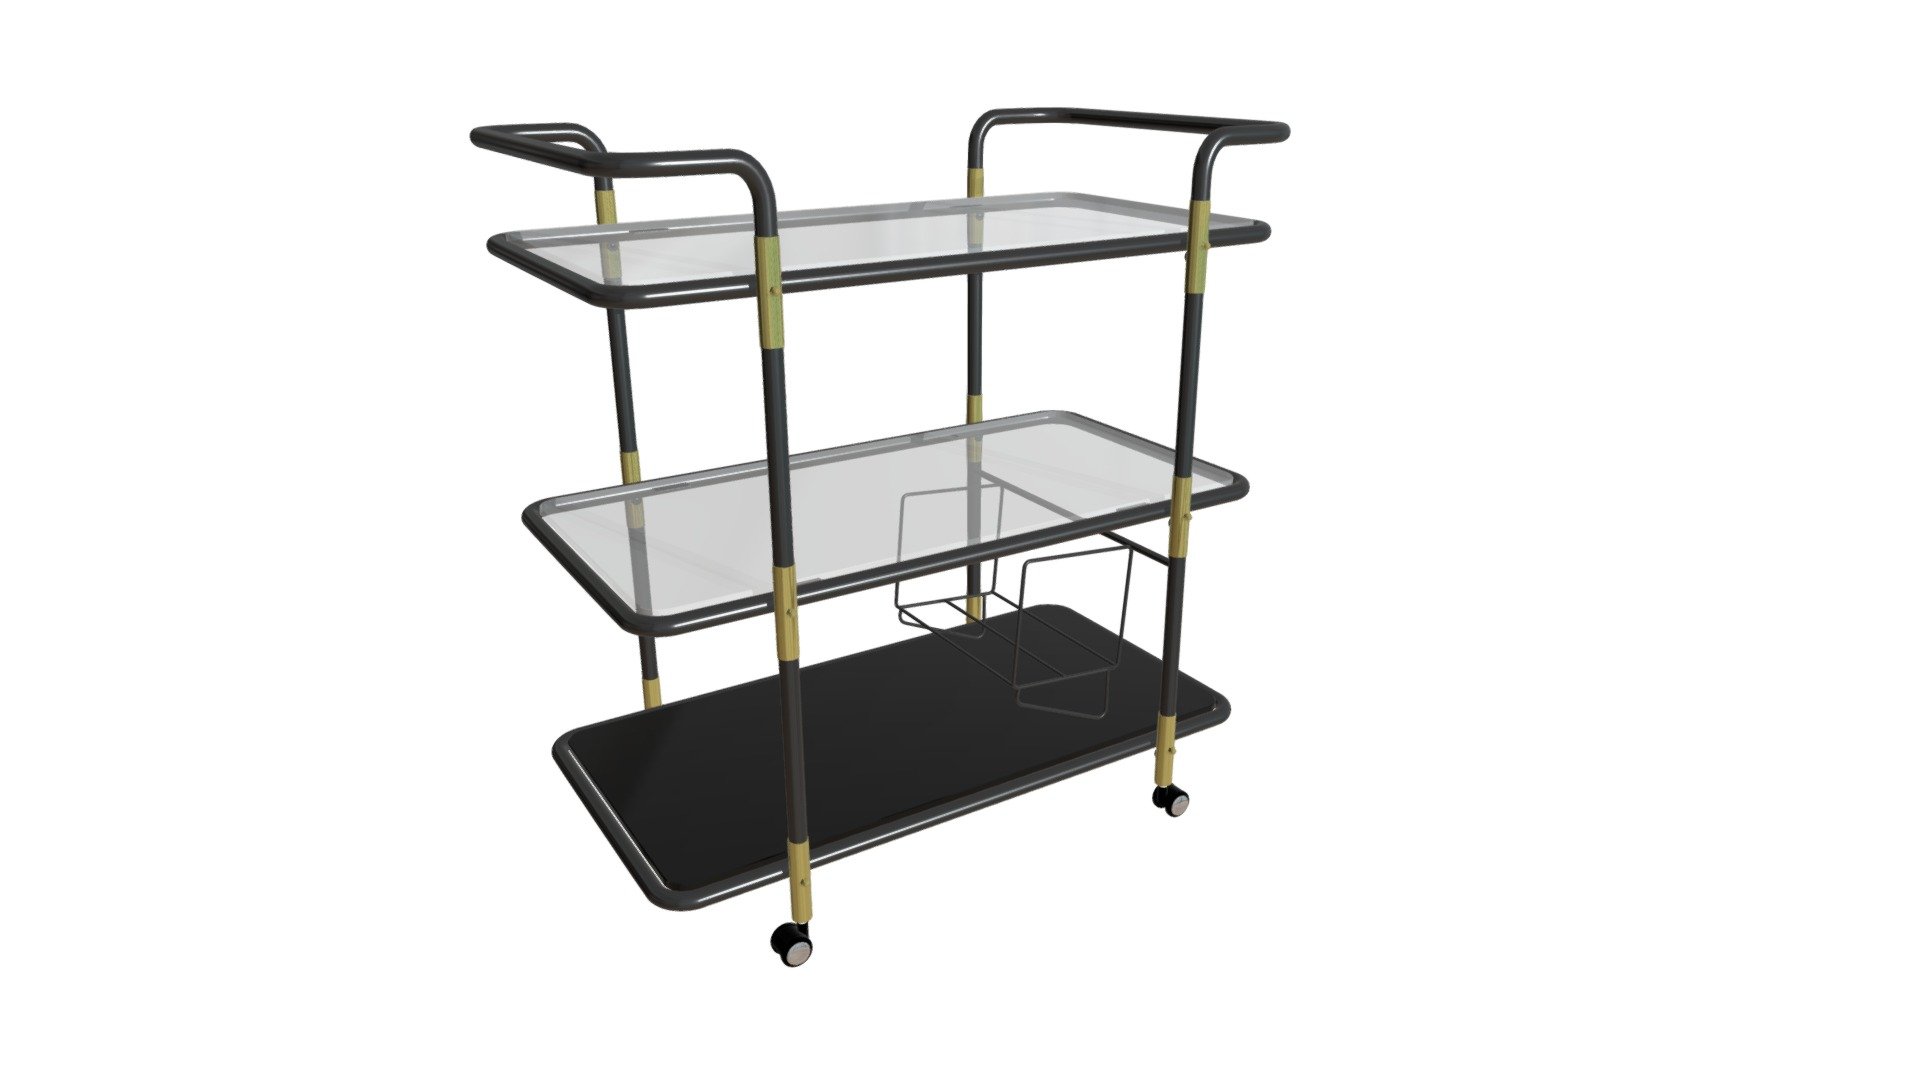 Simple elegance meets functionality, as the Secret serving cart features black tempered glass to bottom of three shelves, ice bucket rack and overall metal frame is accented by beautiful Rose Gold finishes to black tubular frame. Sturdy design offers slim profile throughout and easy gliding locking casters. Perfect accent for any room in your home, office or commercial space. https://zuomod.com/secret-serving-cart - Secret Serving Cart - 100191 - Buy Royalty Free 3D model by Zuo Modern (@zuo) 3d model